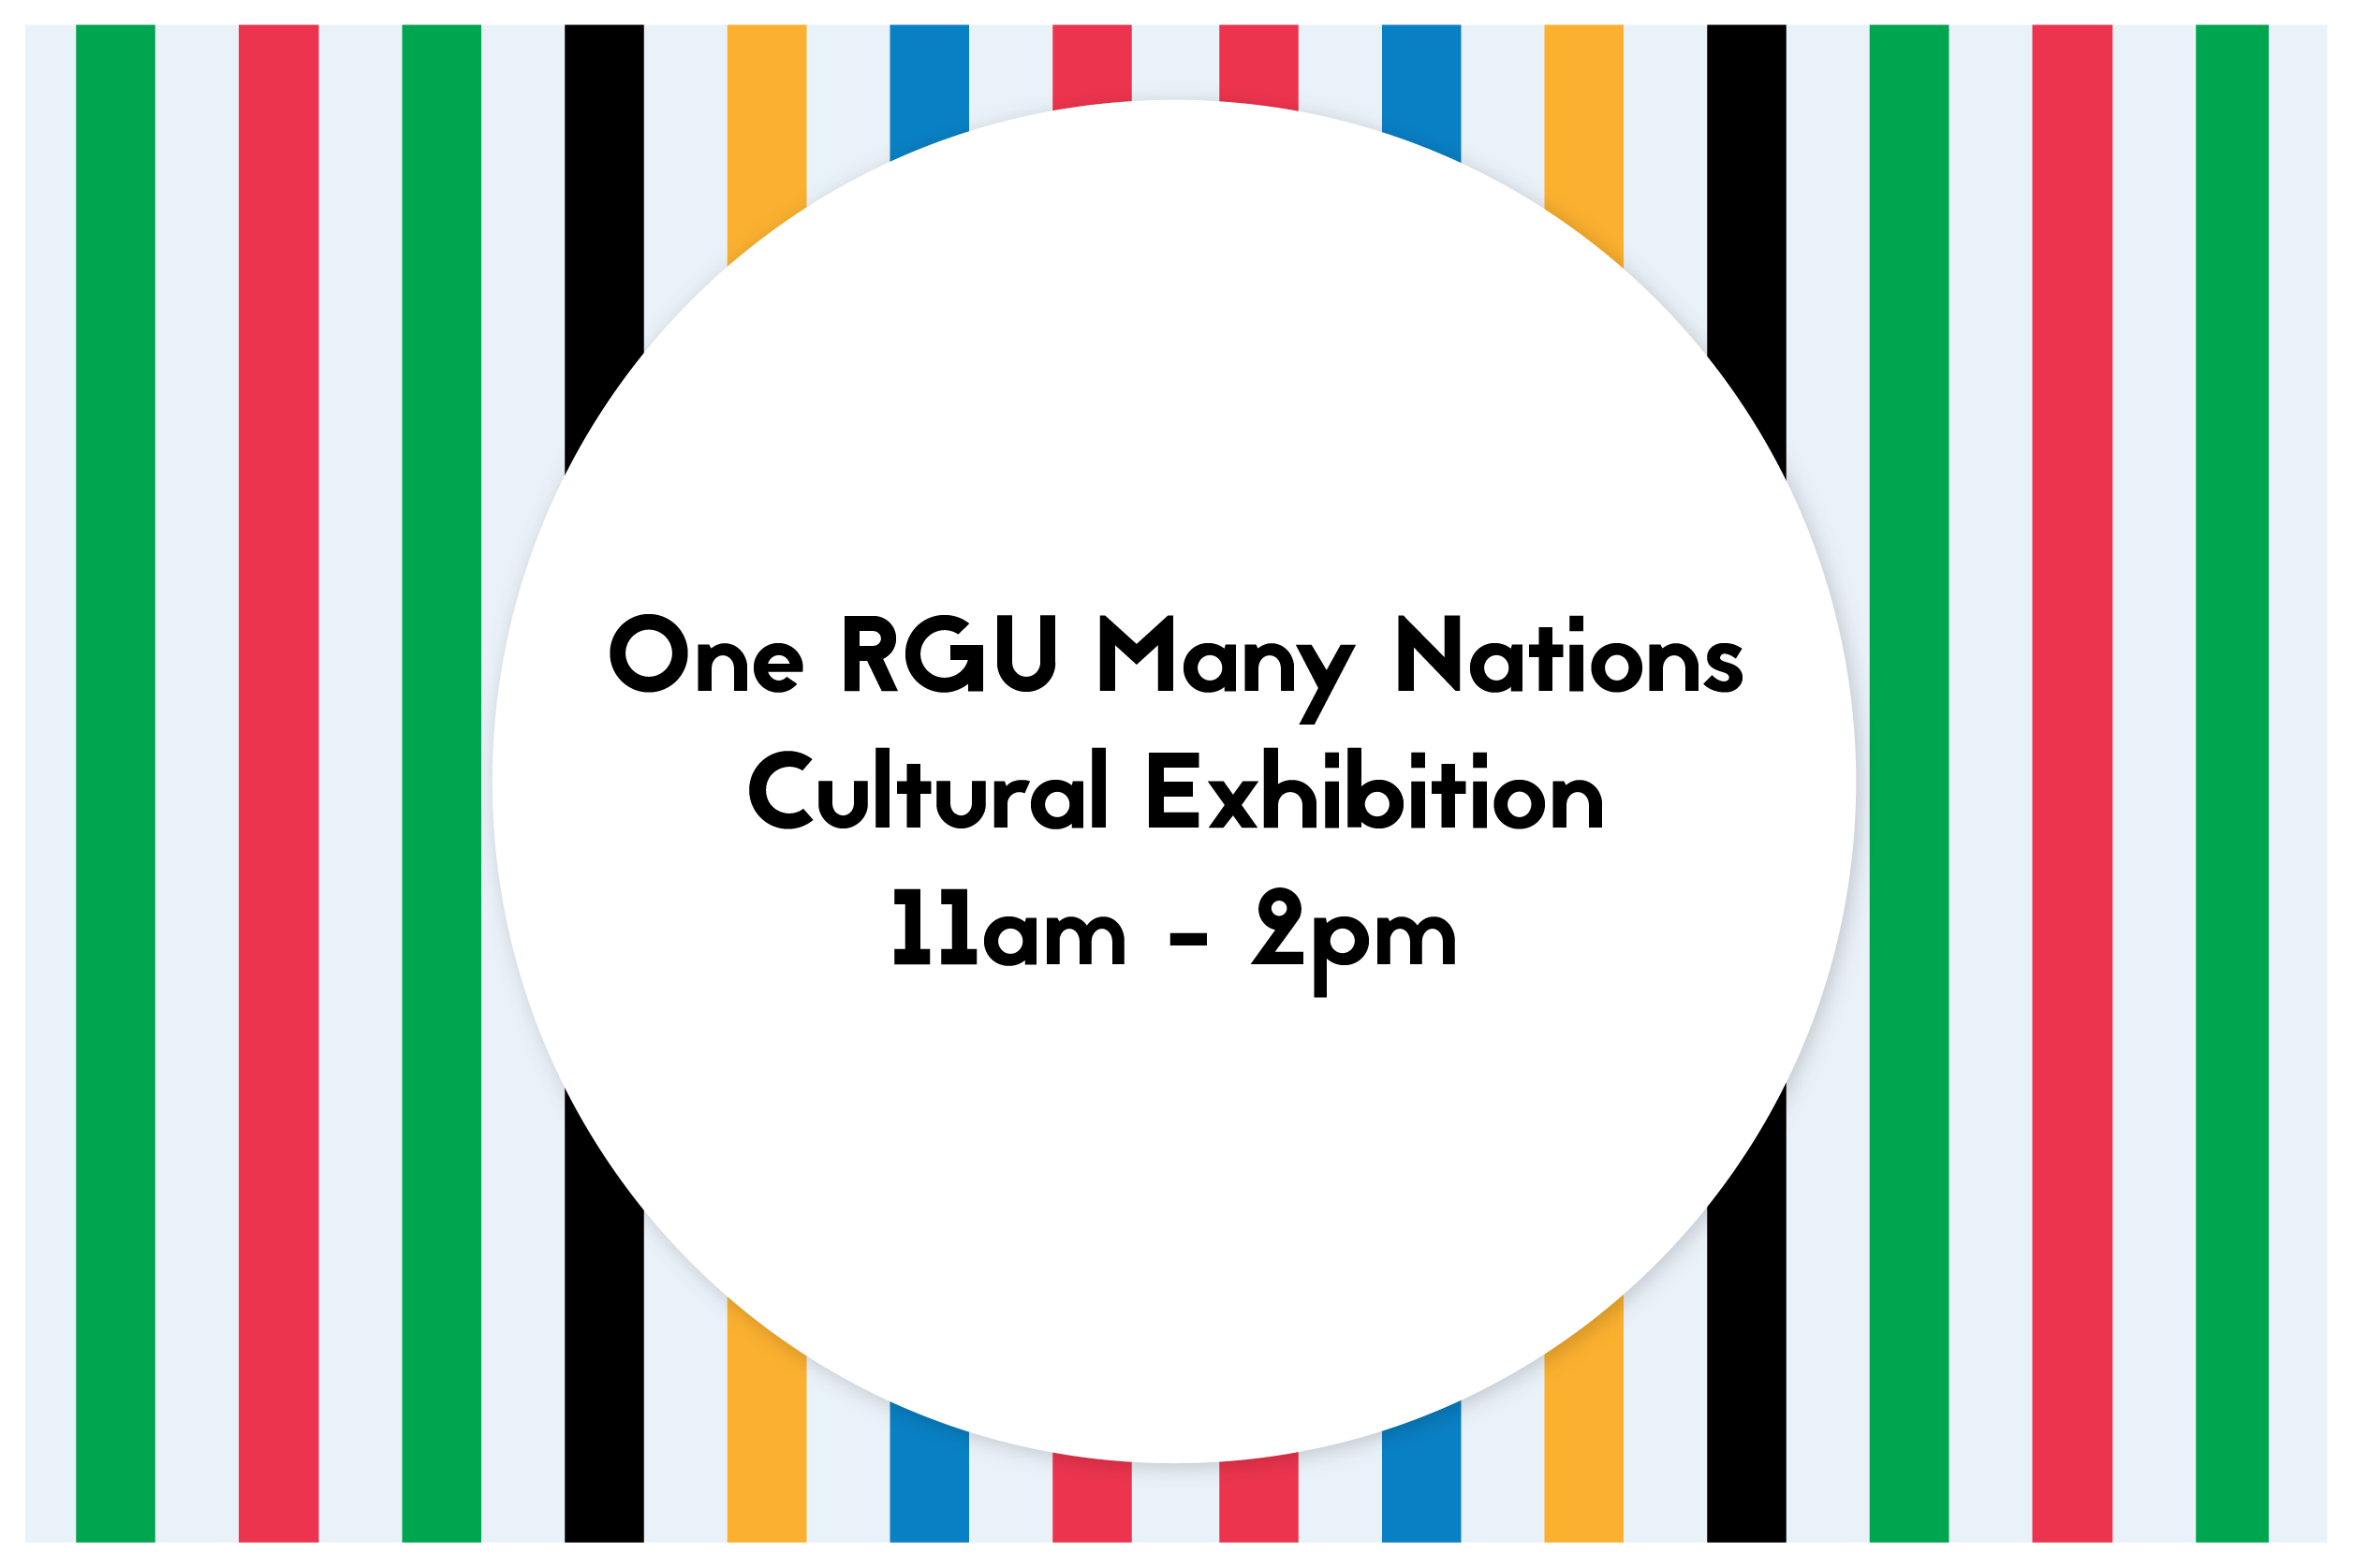 One RGU Many Nations - Cultural Exhibition